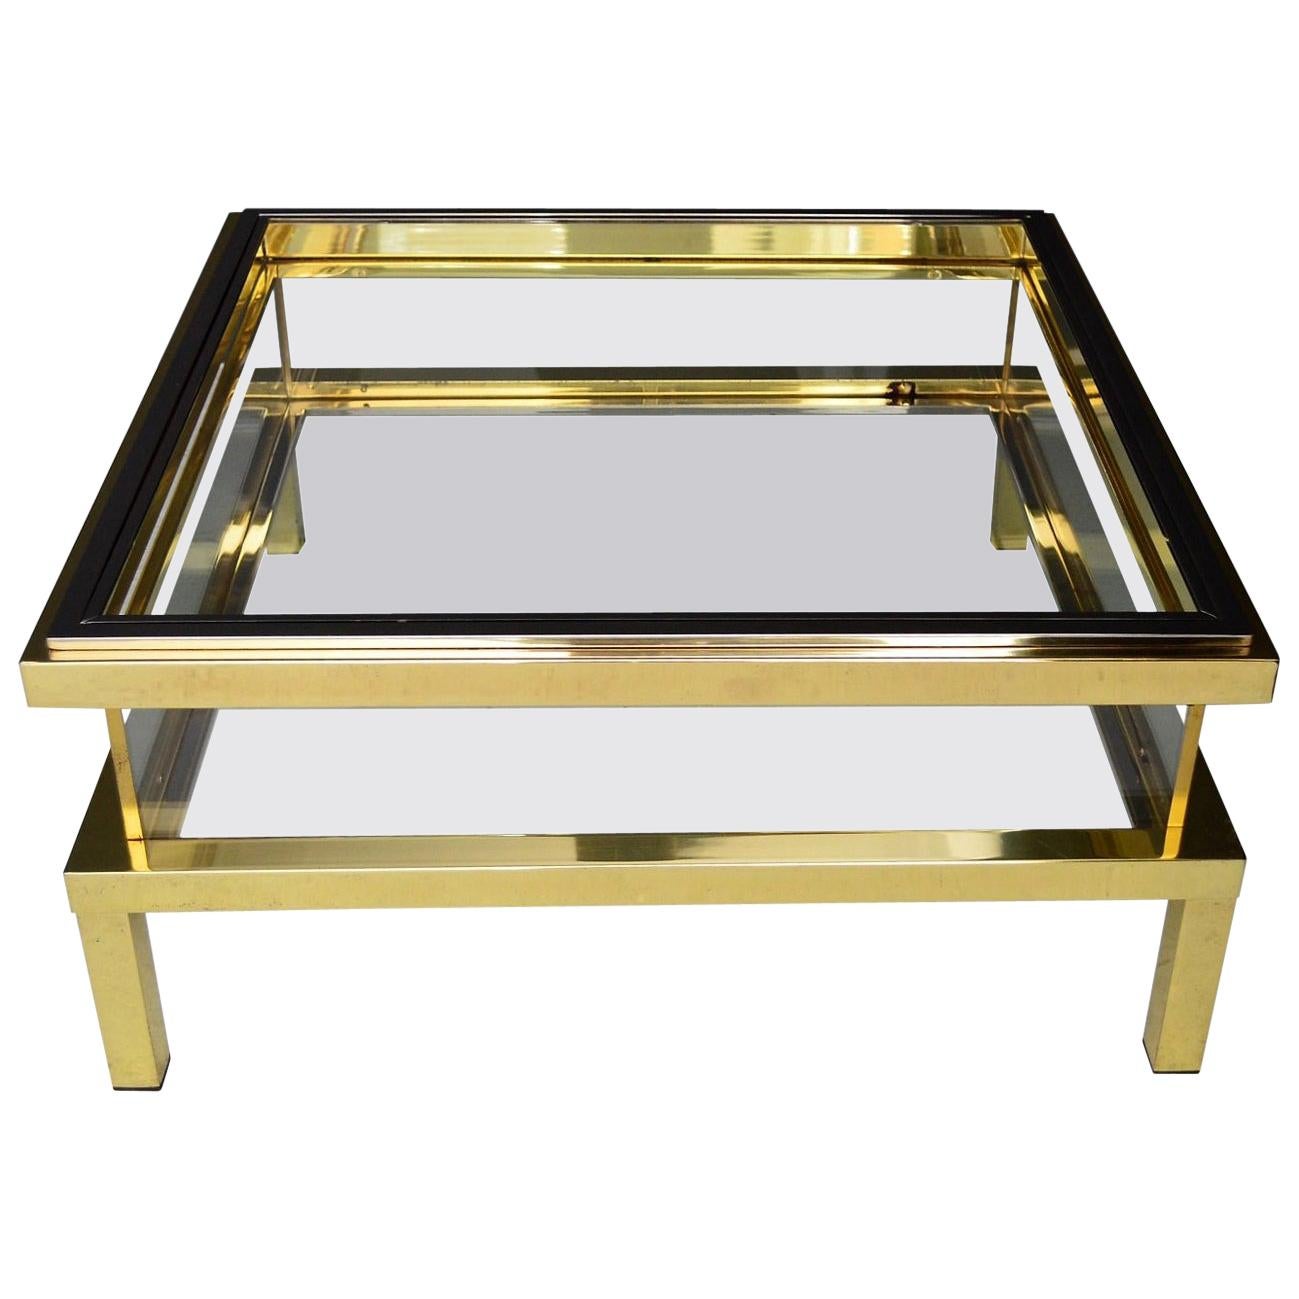 French Regency Coffee Table with Brass Sliding Showcase by Maison Jansen, 1970s